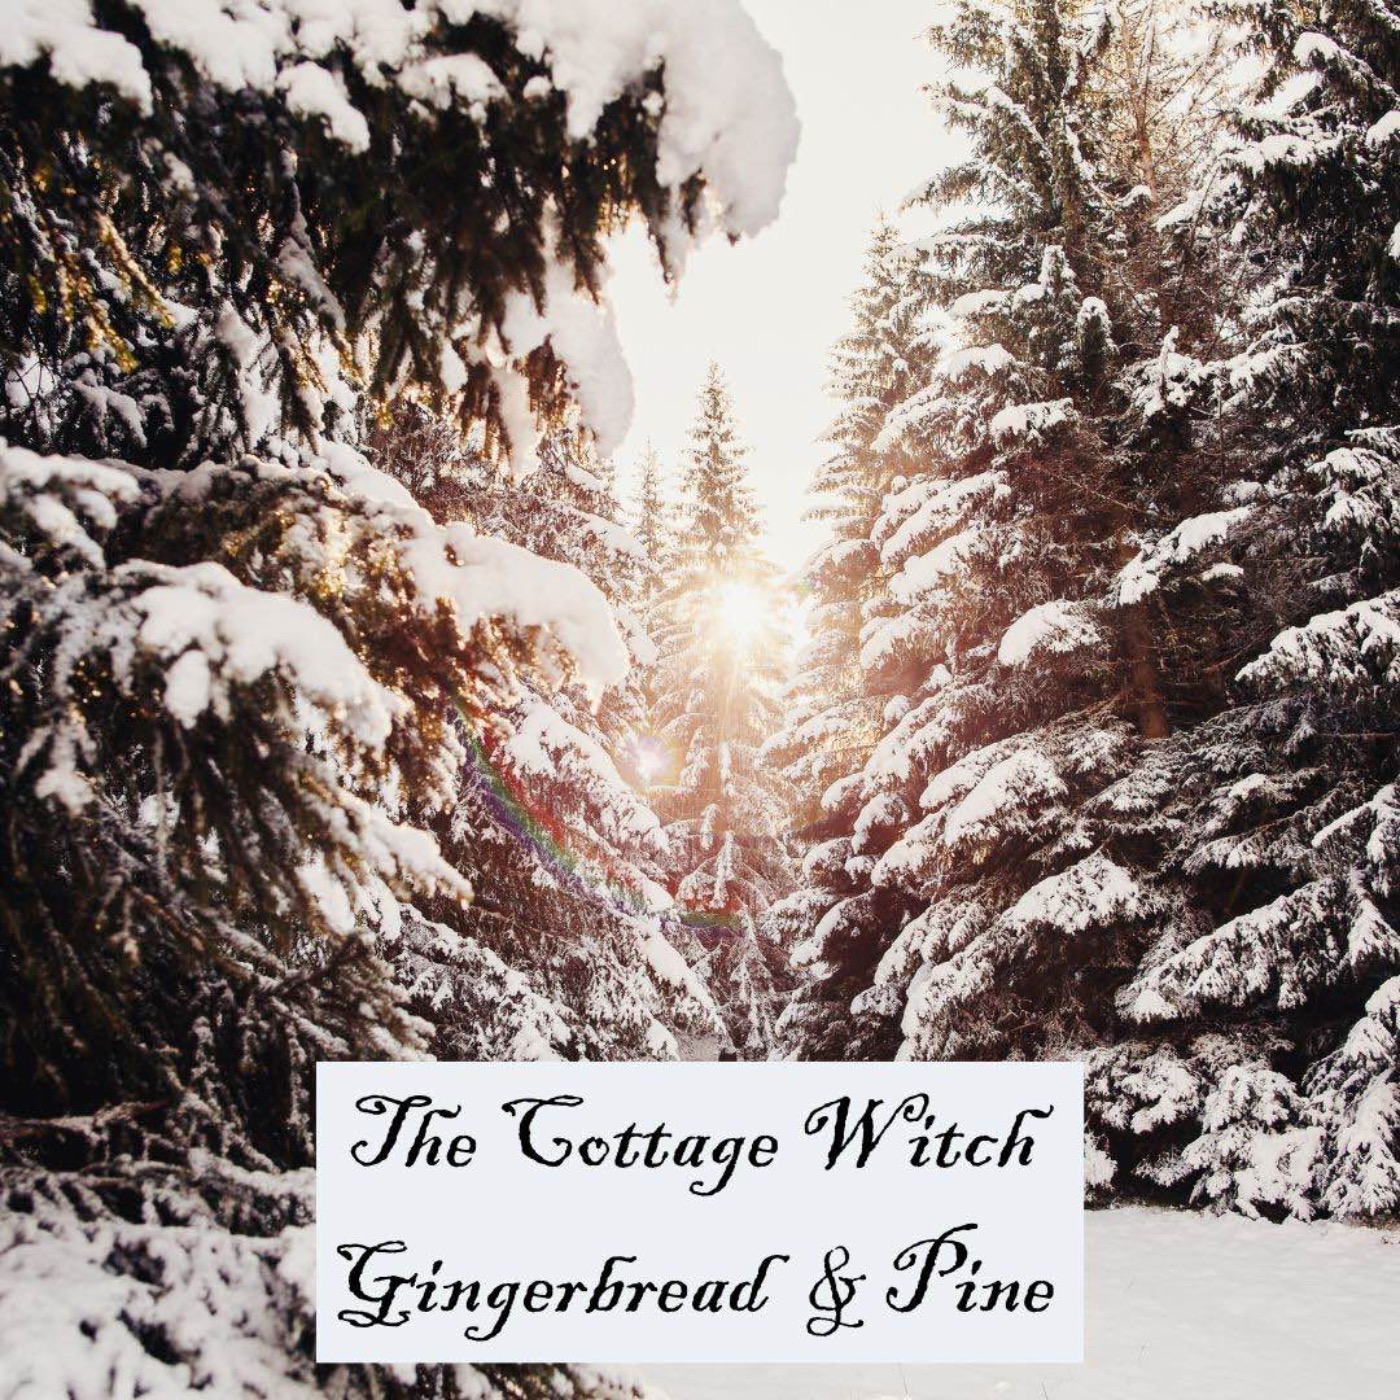 The Cottage Witch - Gingerbread & Pine